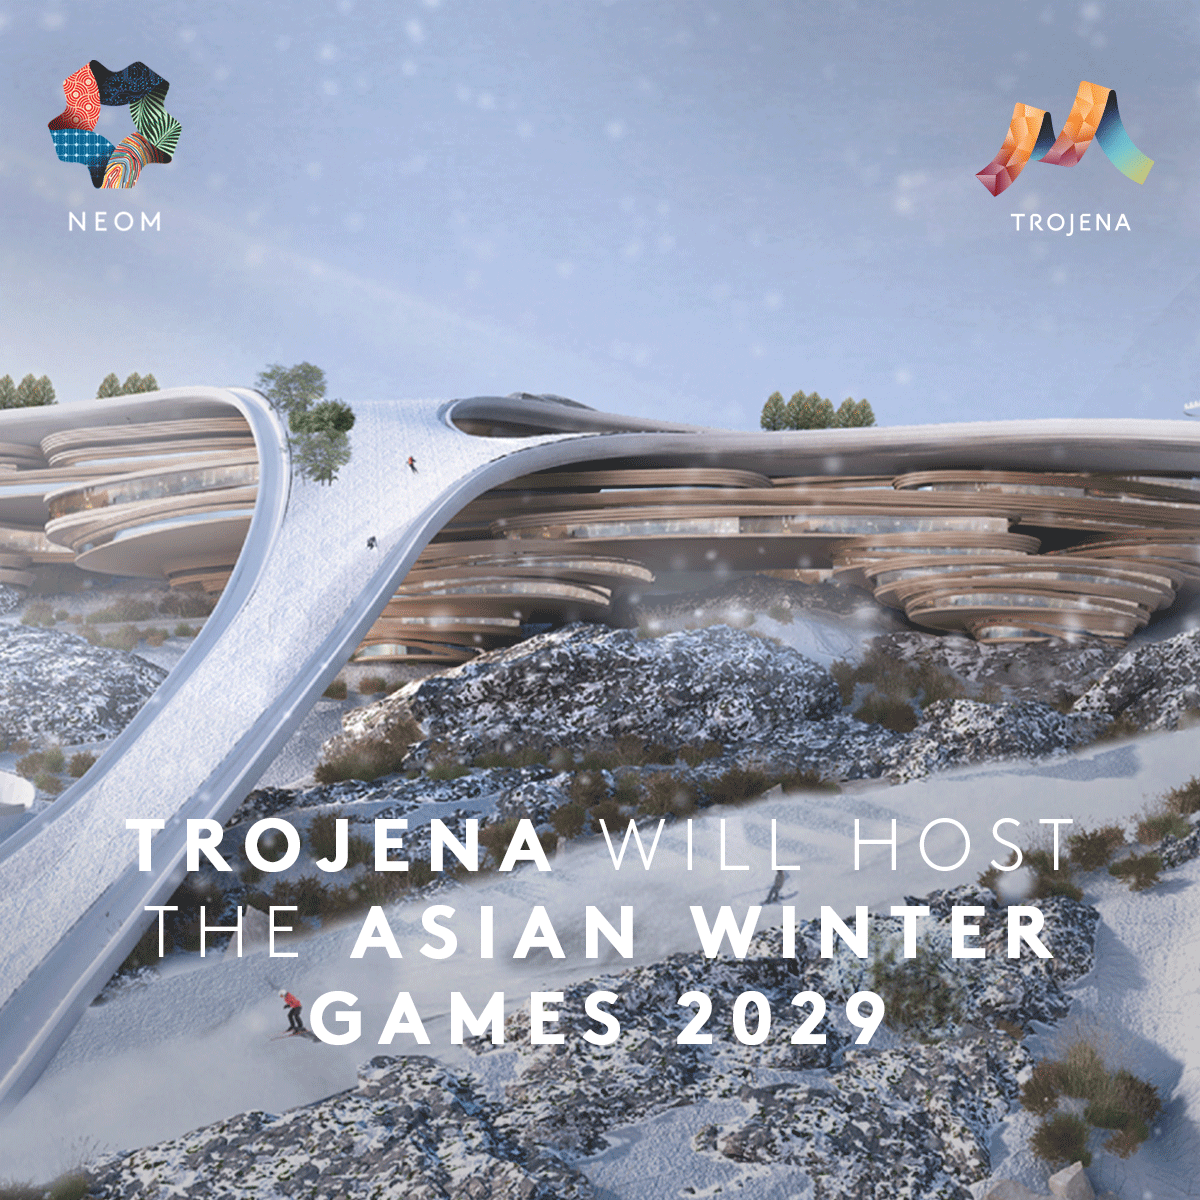 Saudi Why 2029 Asian Winter Games Is Host Controversial Pick Rediff